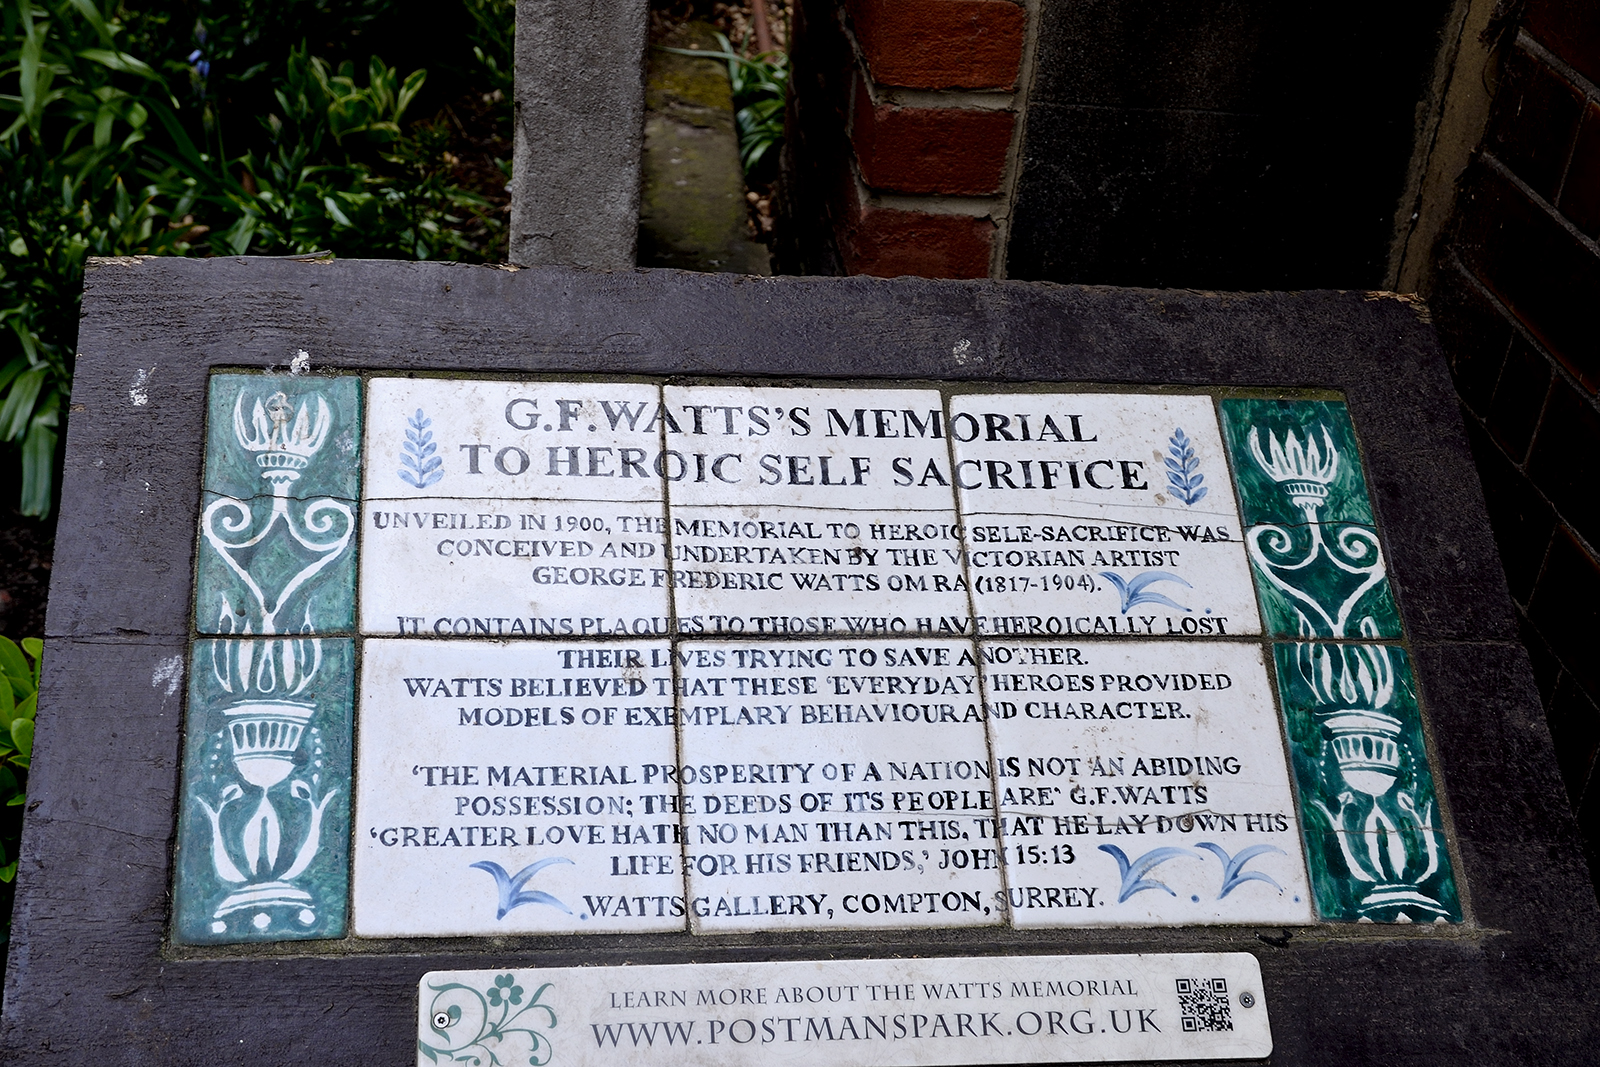 20170416_City-of-London_St-Martins-le-Grand_Plaque-about-memorial-in-Postmans-Park